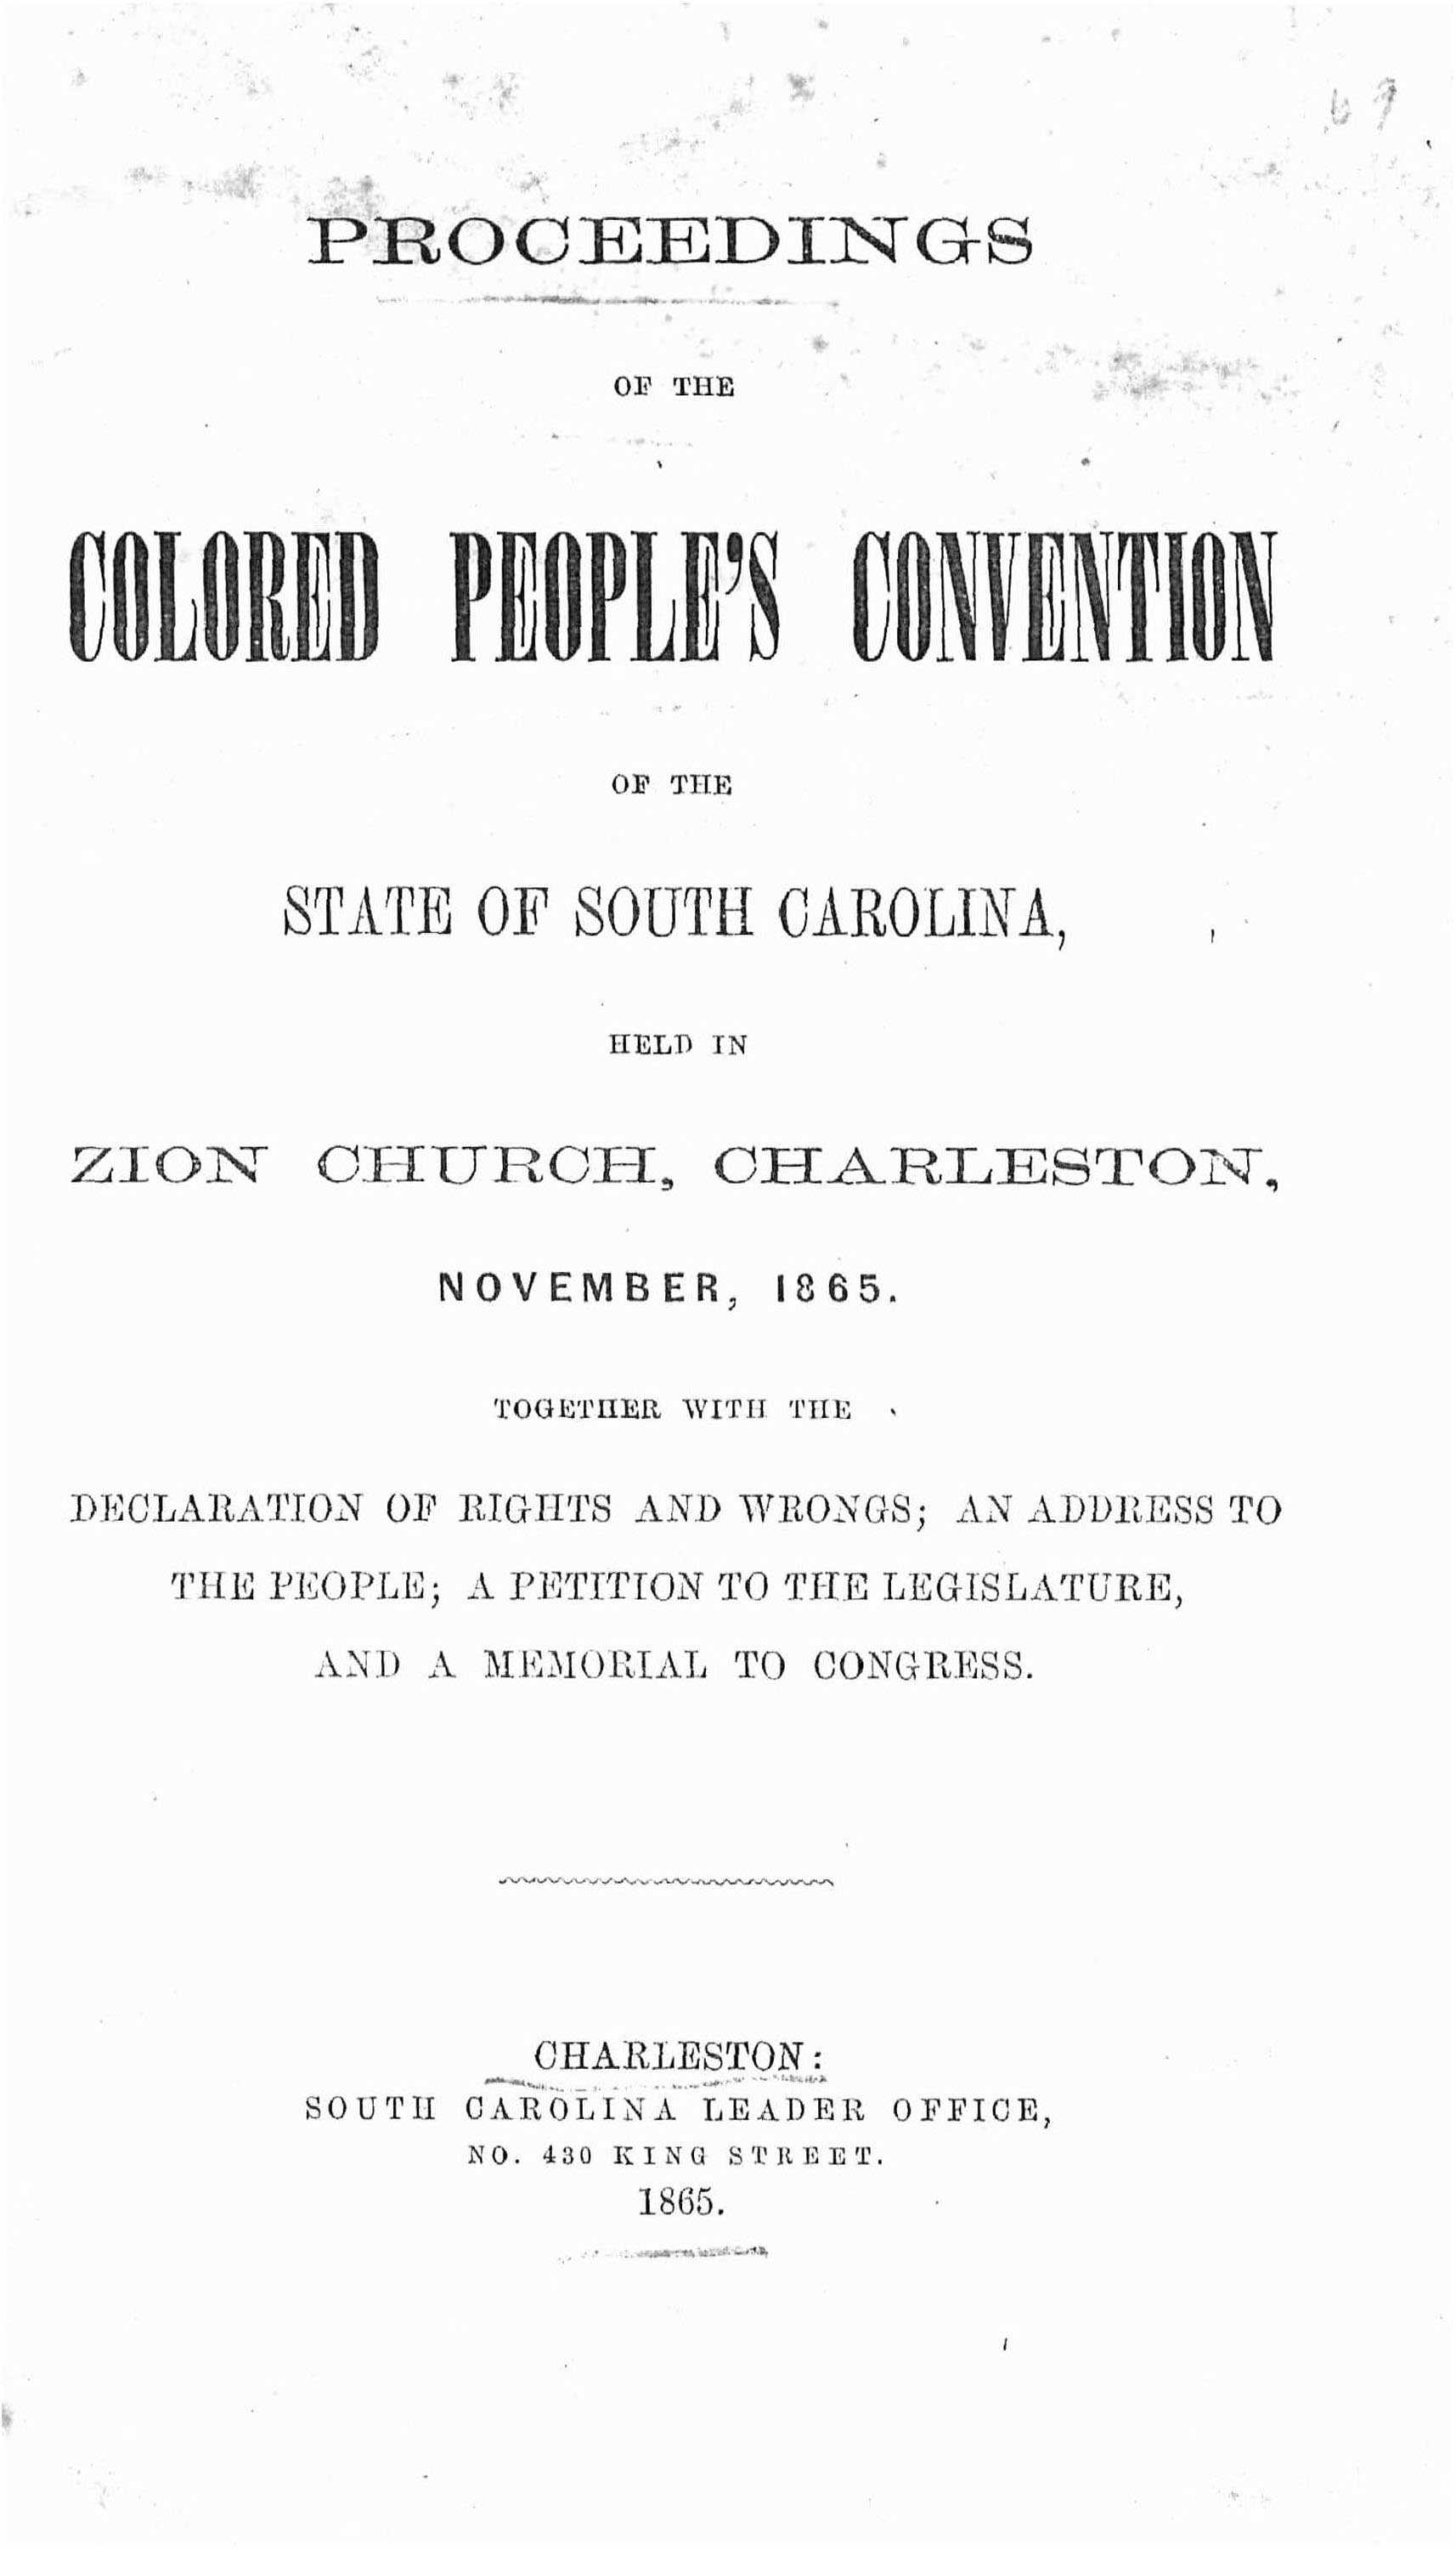 A white paper advertising for the proceeding for the Colored People's Convention. It has the location and date.